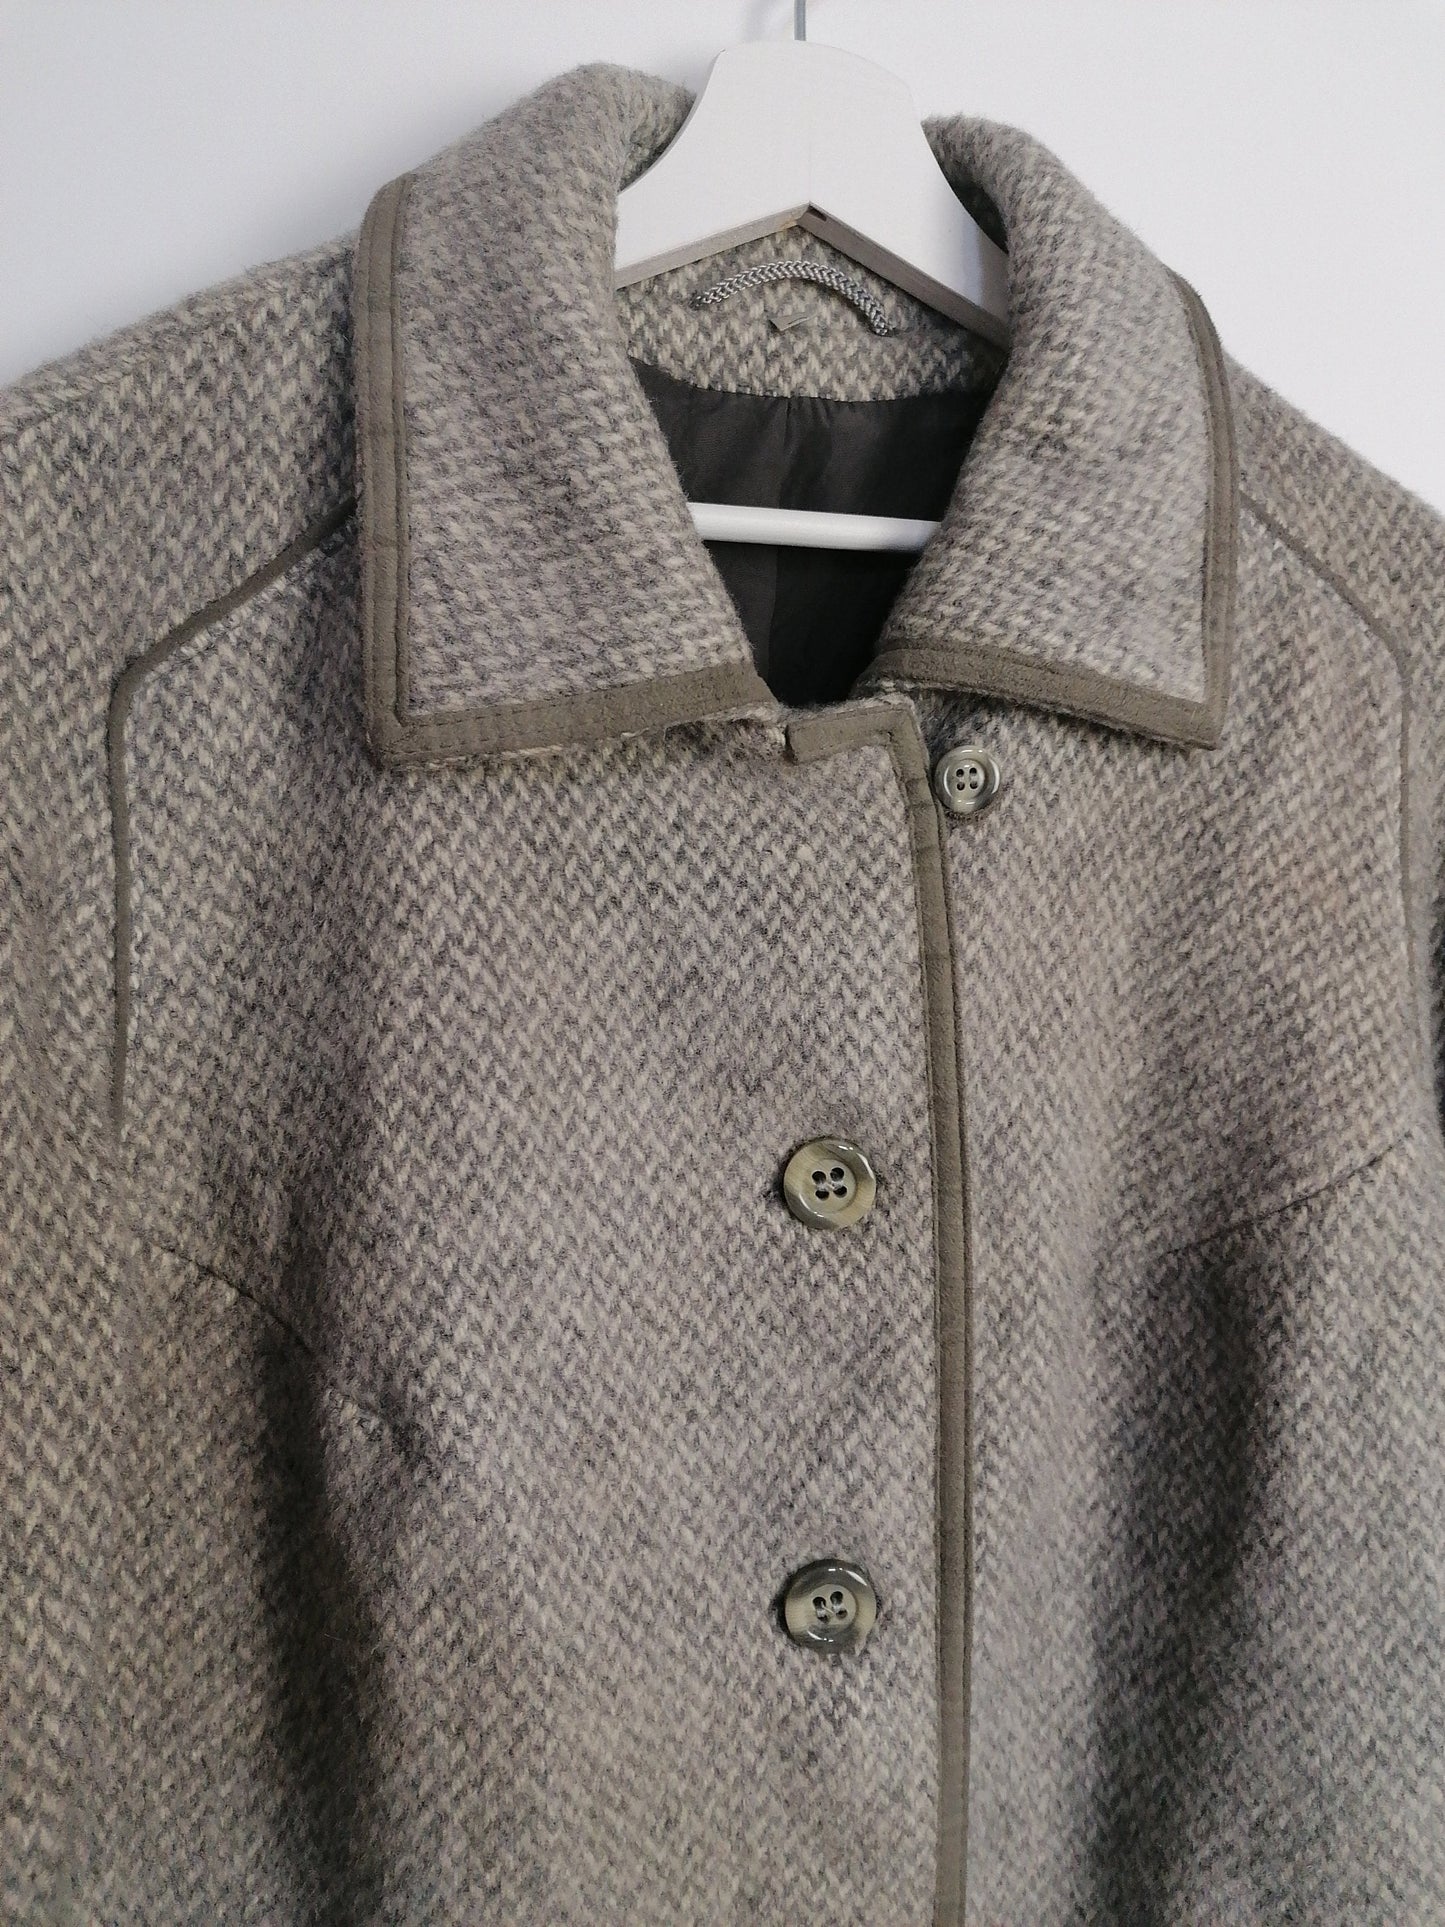 80's West Germany Pure New Wool Coat - size M-L